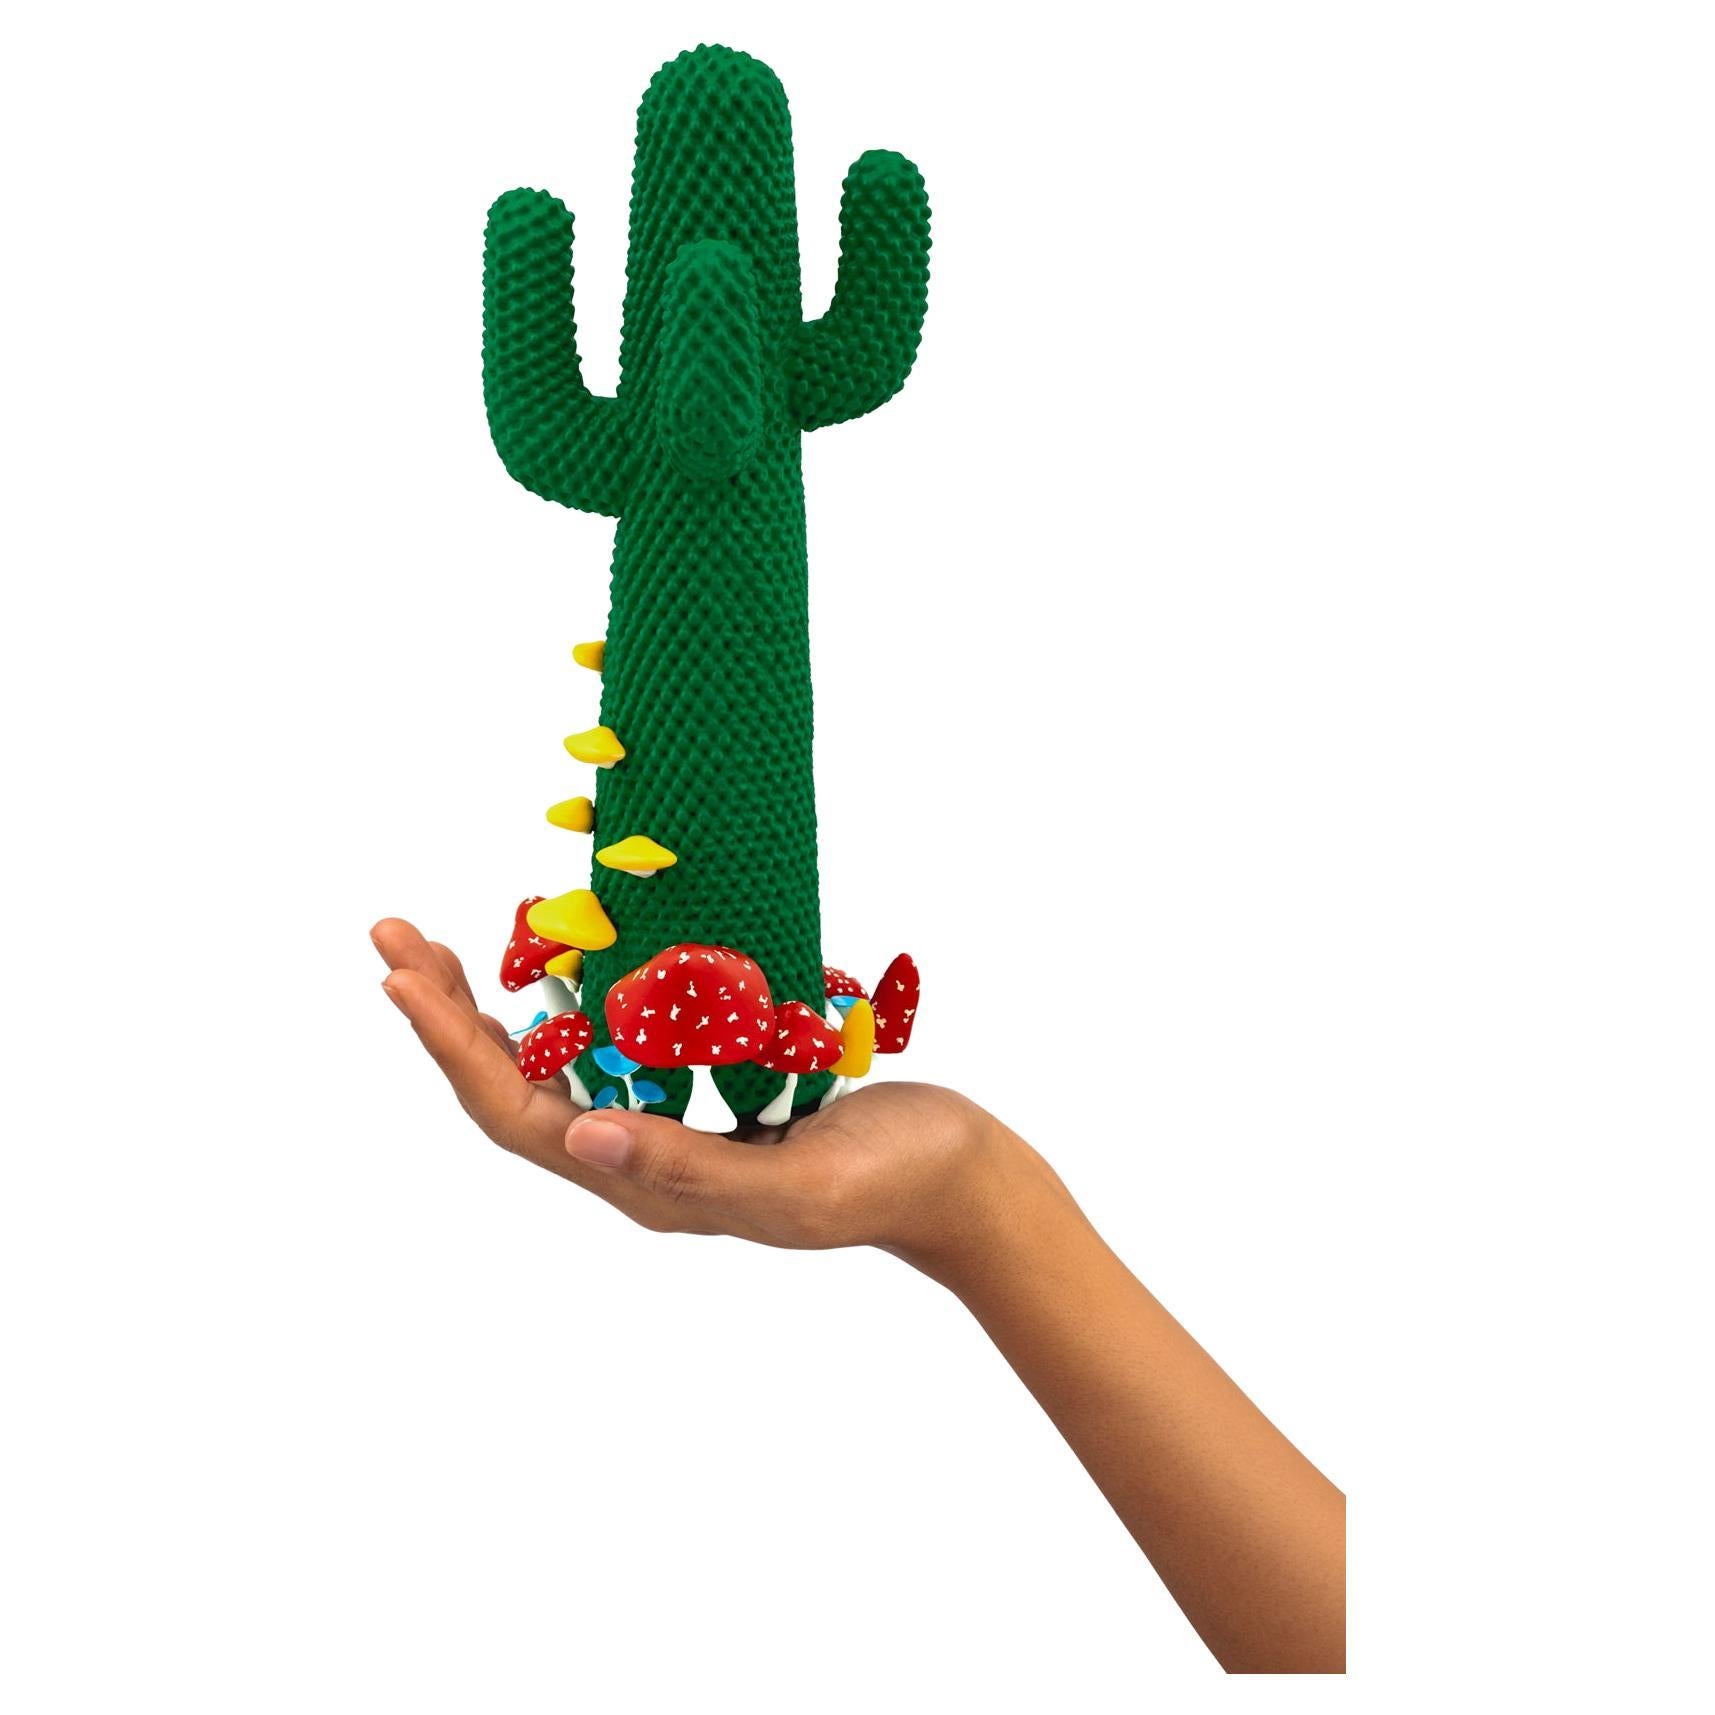 Limited Edition #45/99

Gufram presents the miniaturised version of the Shroom CACTUS® created in collaboration with A$AP Rocky and the artist’s new design studio HOMMEMADE Exactly as the real-Size Shroom CACTUS®, the new Guframini piece features